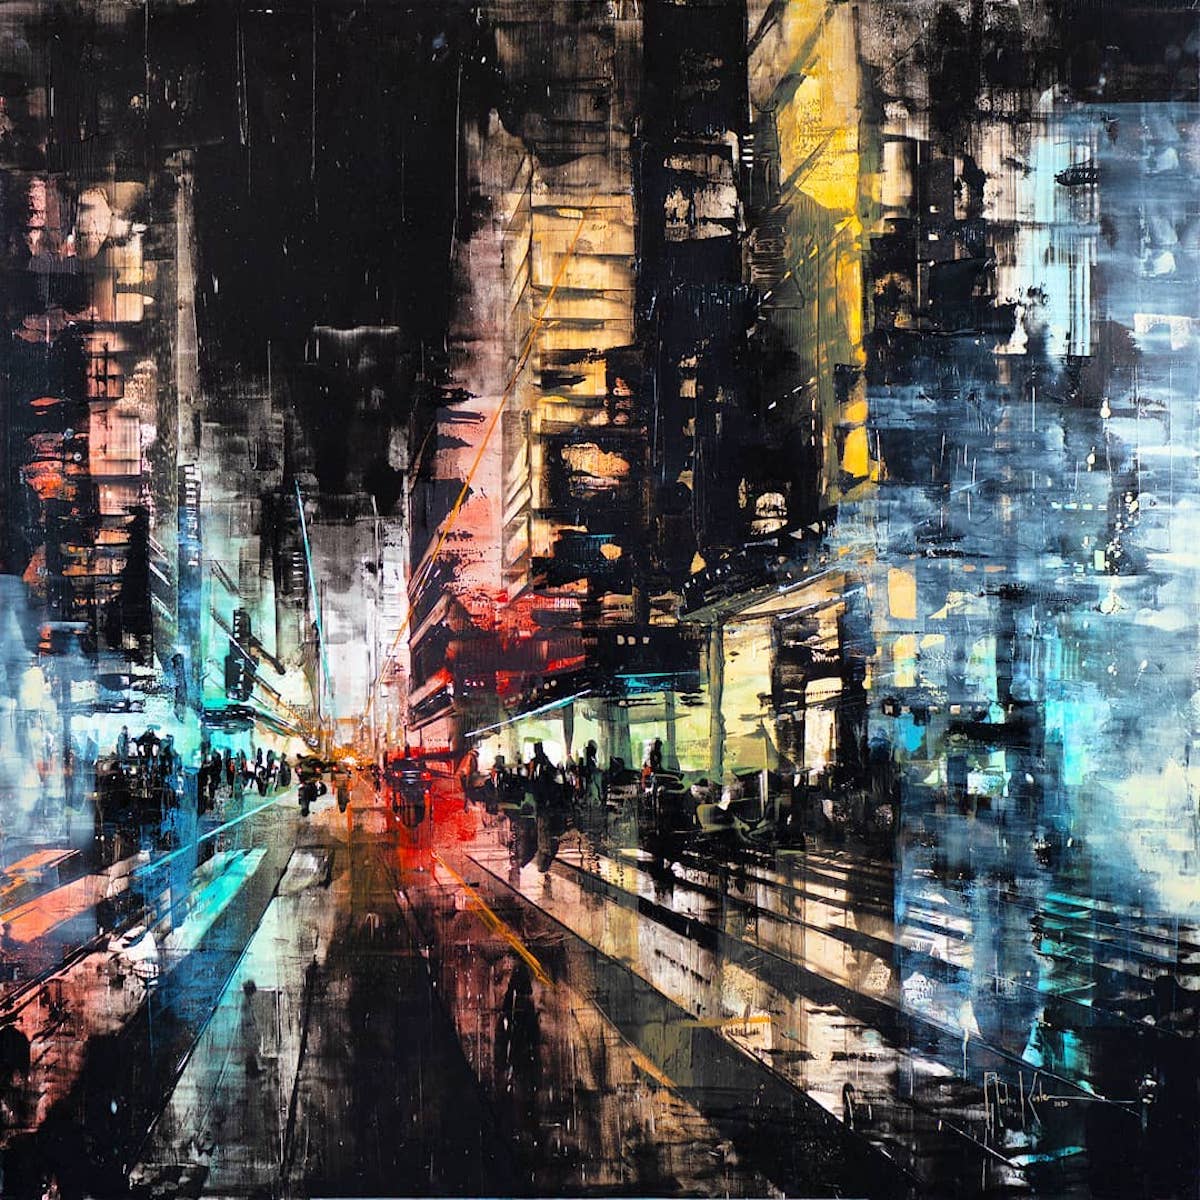 Expressive Paintings Capture the Energy of Cities at Night [Interview]